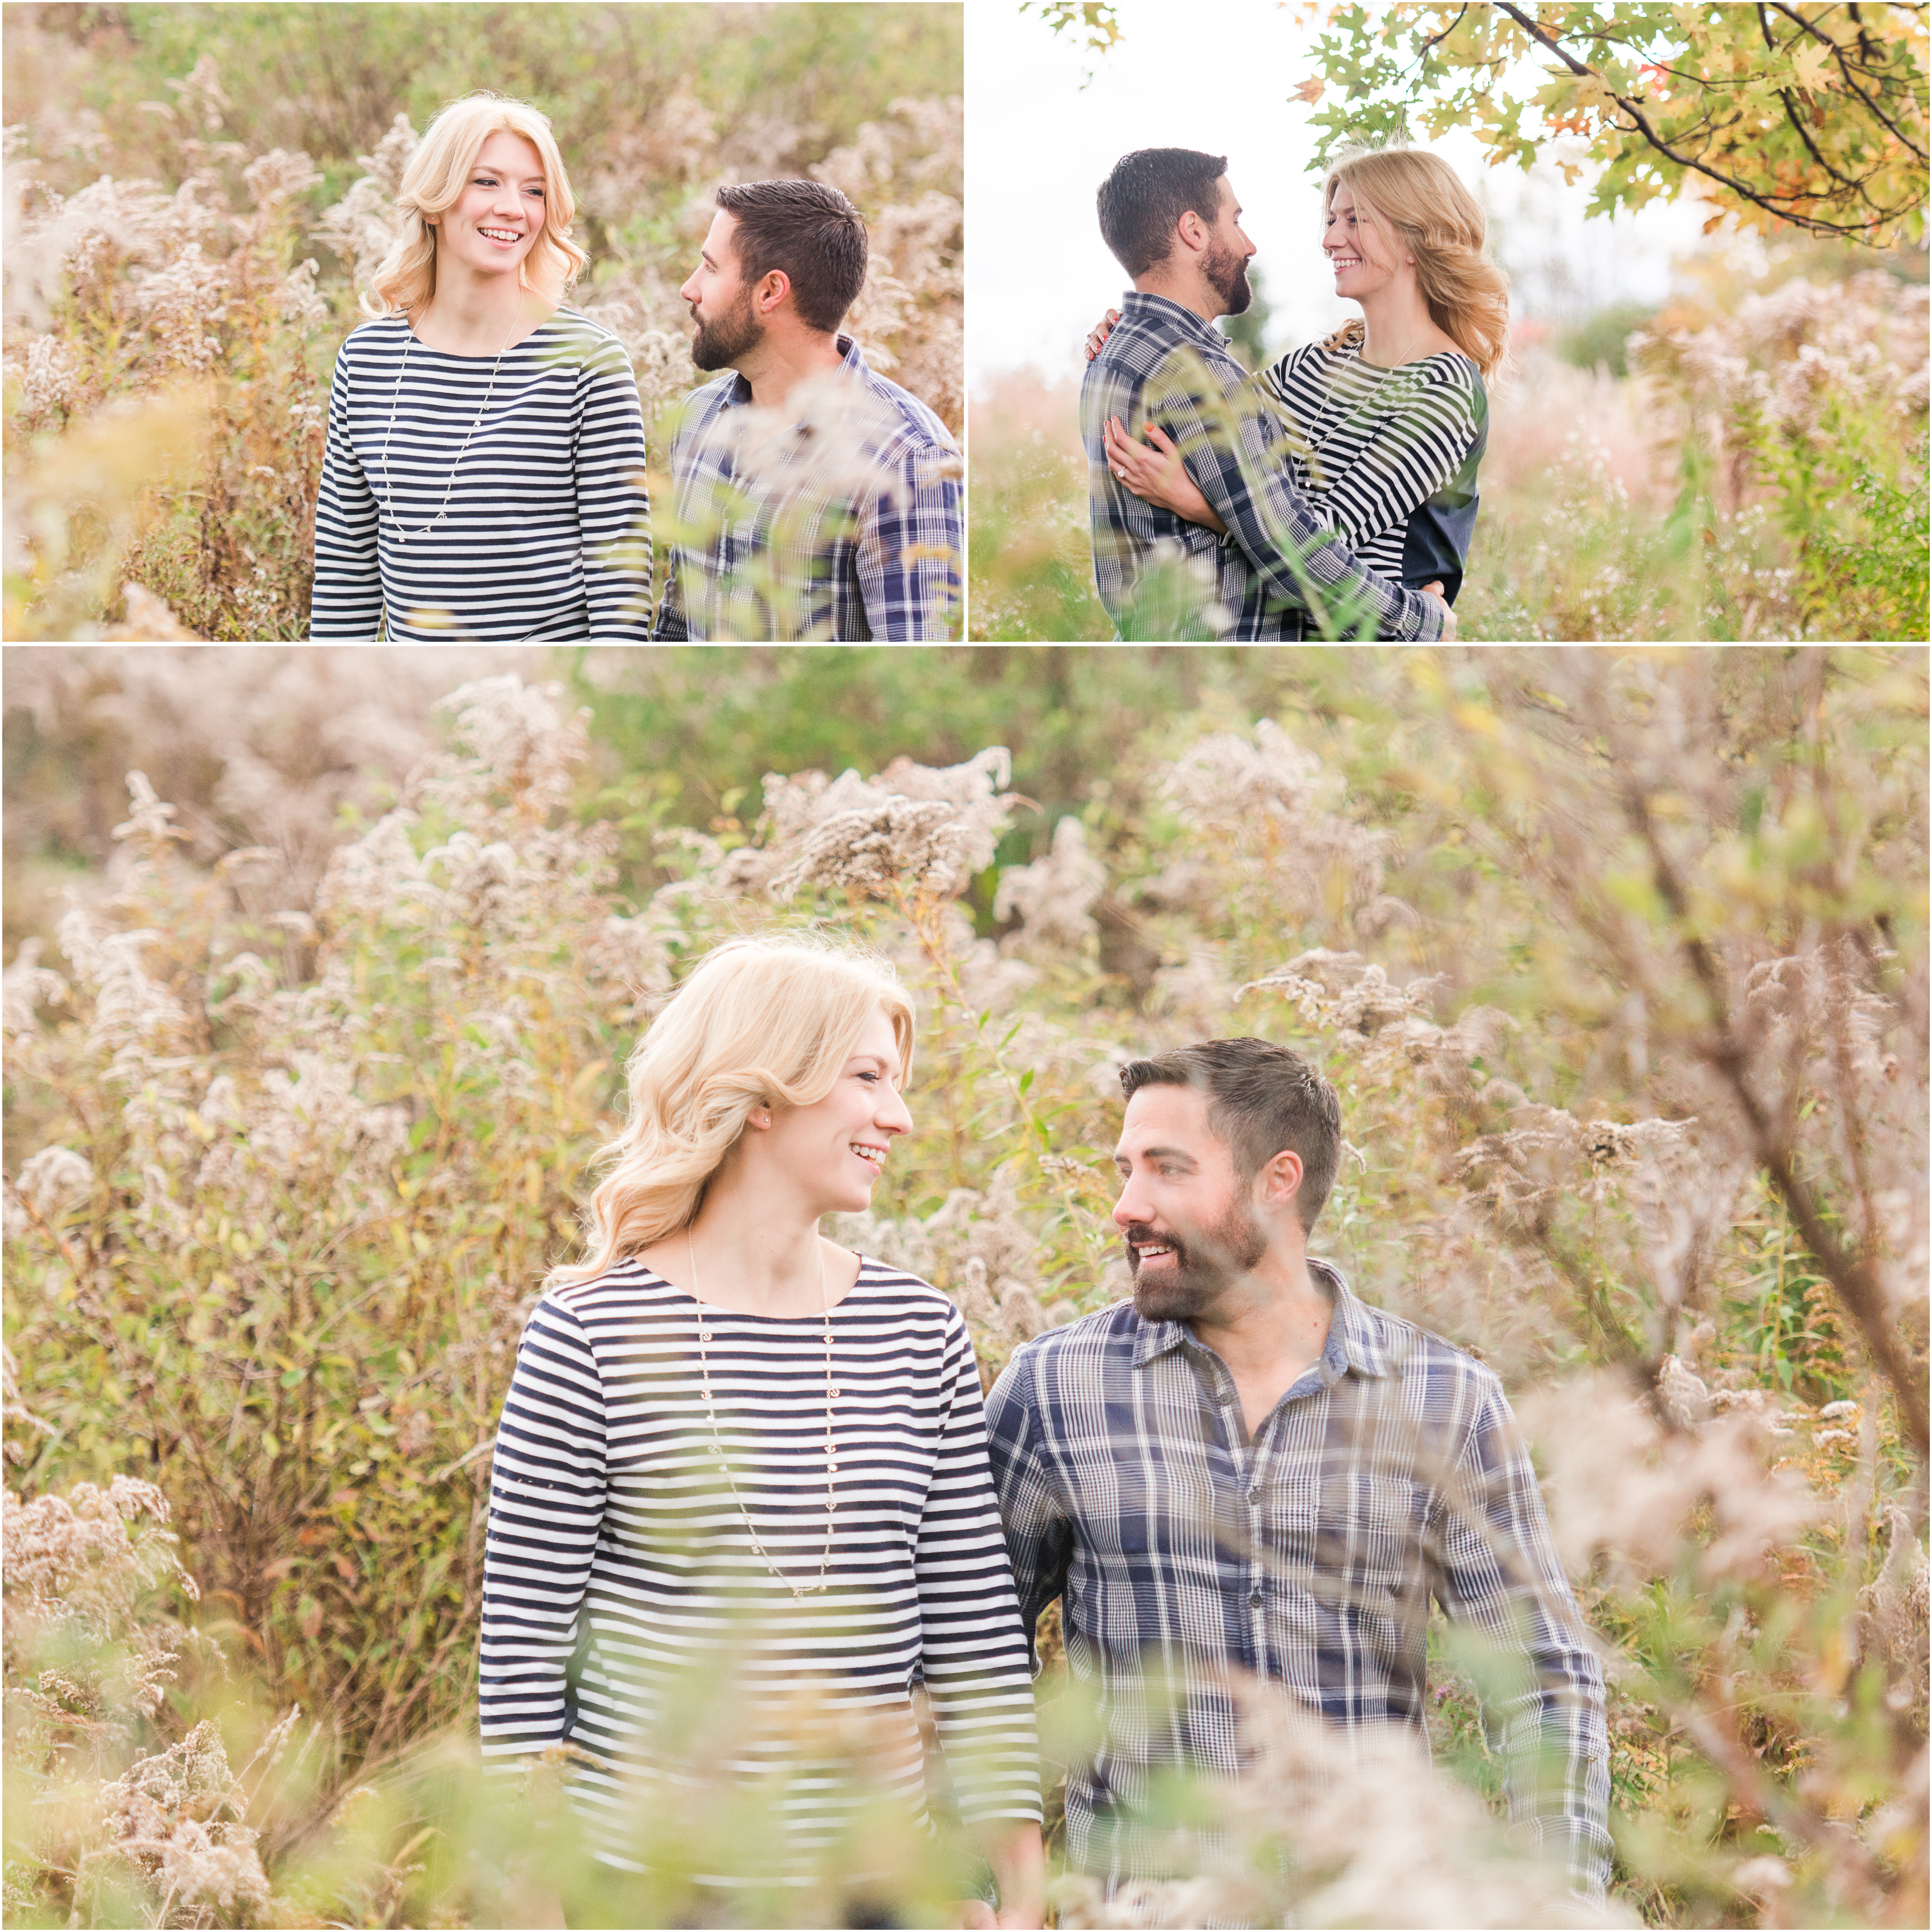 Autumn Engagement Session in Tully, New York.